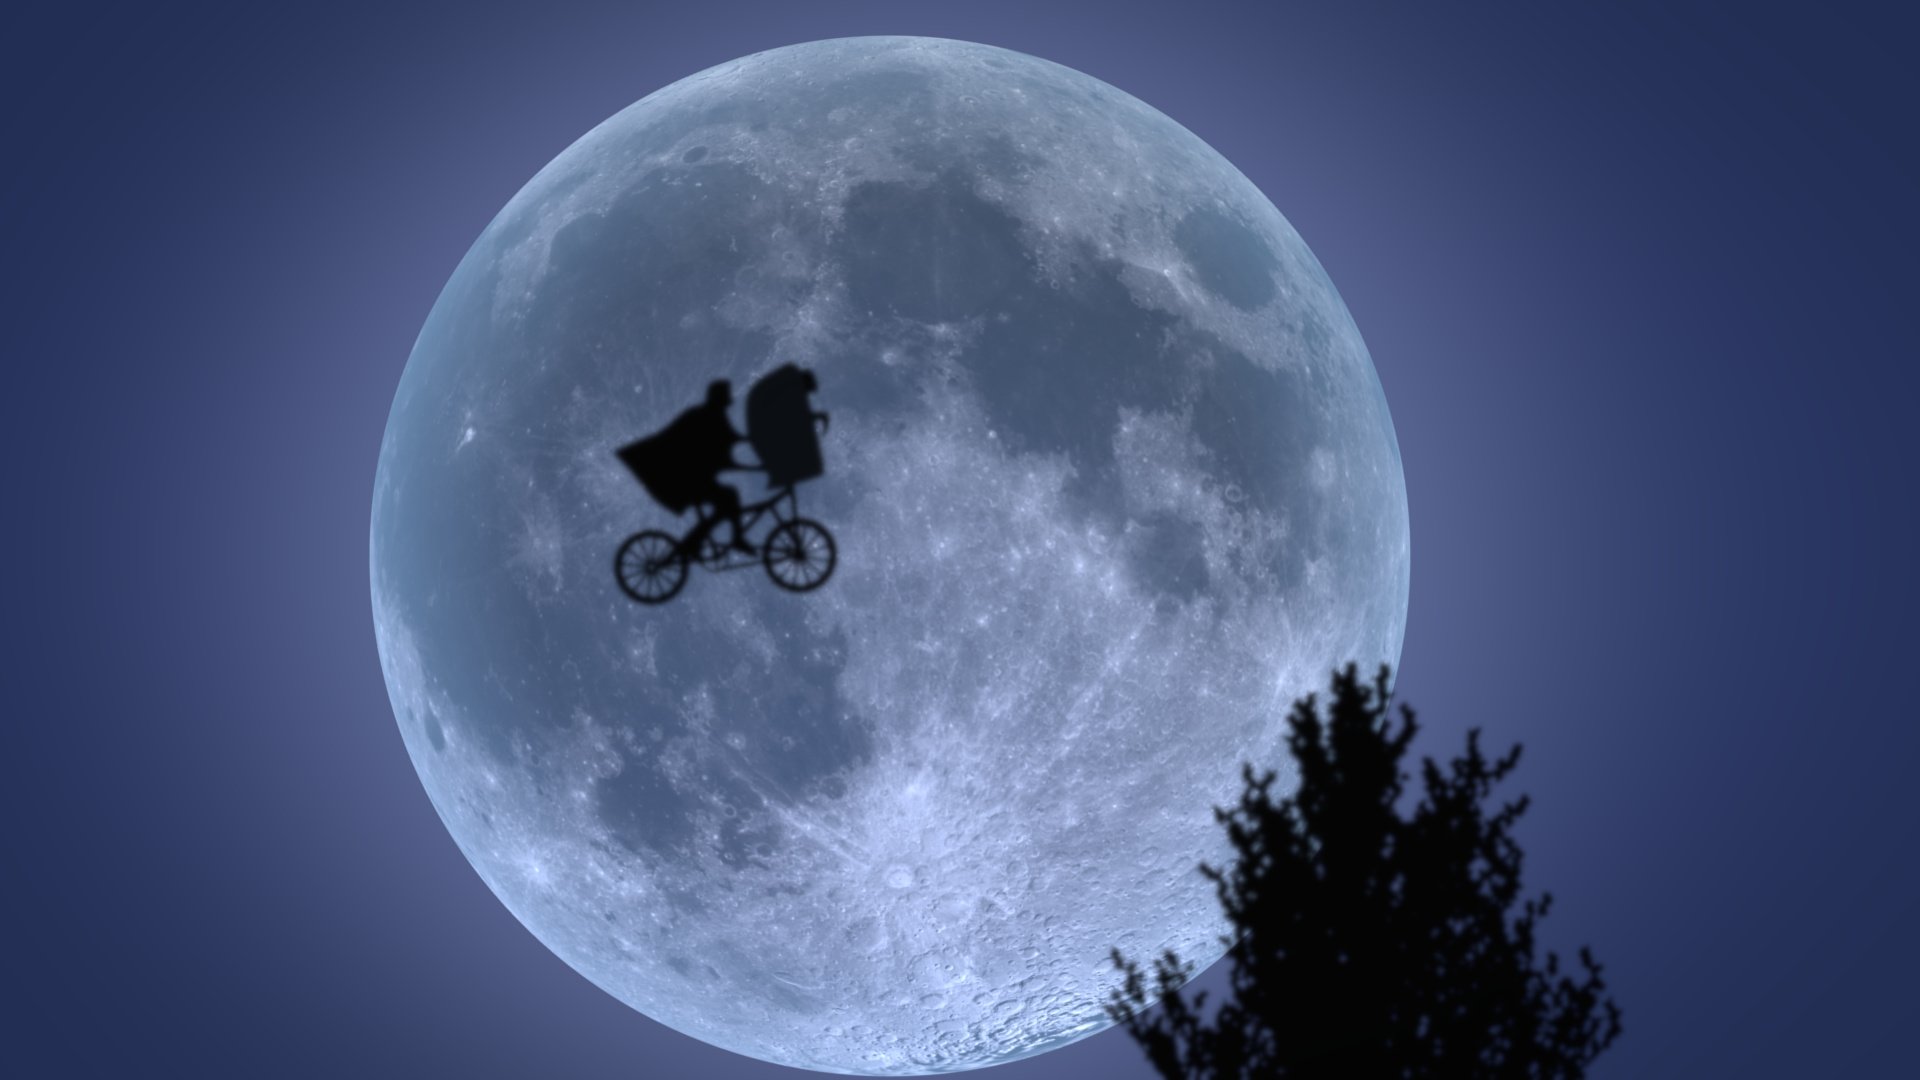 E.T. the extra-terrestrial